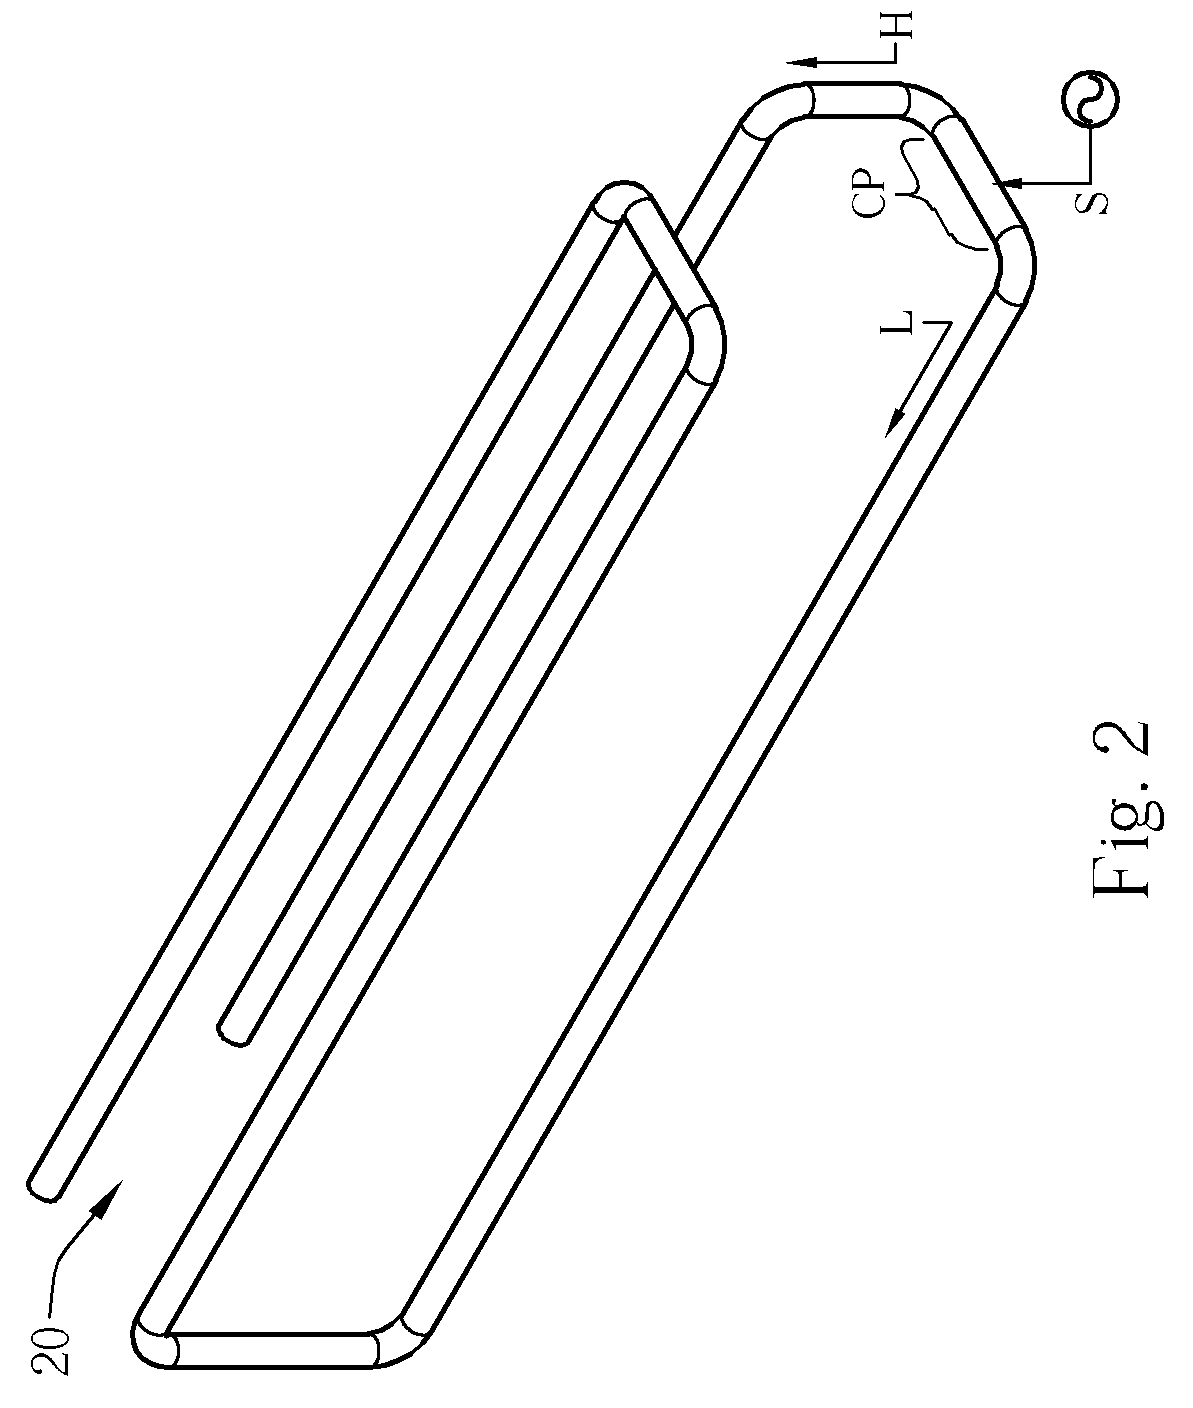 Multi-band antenna of compact size